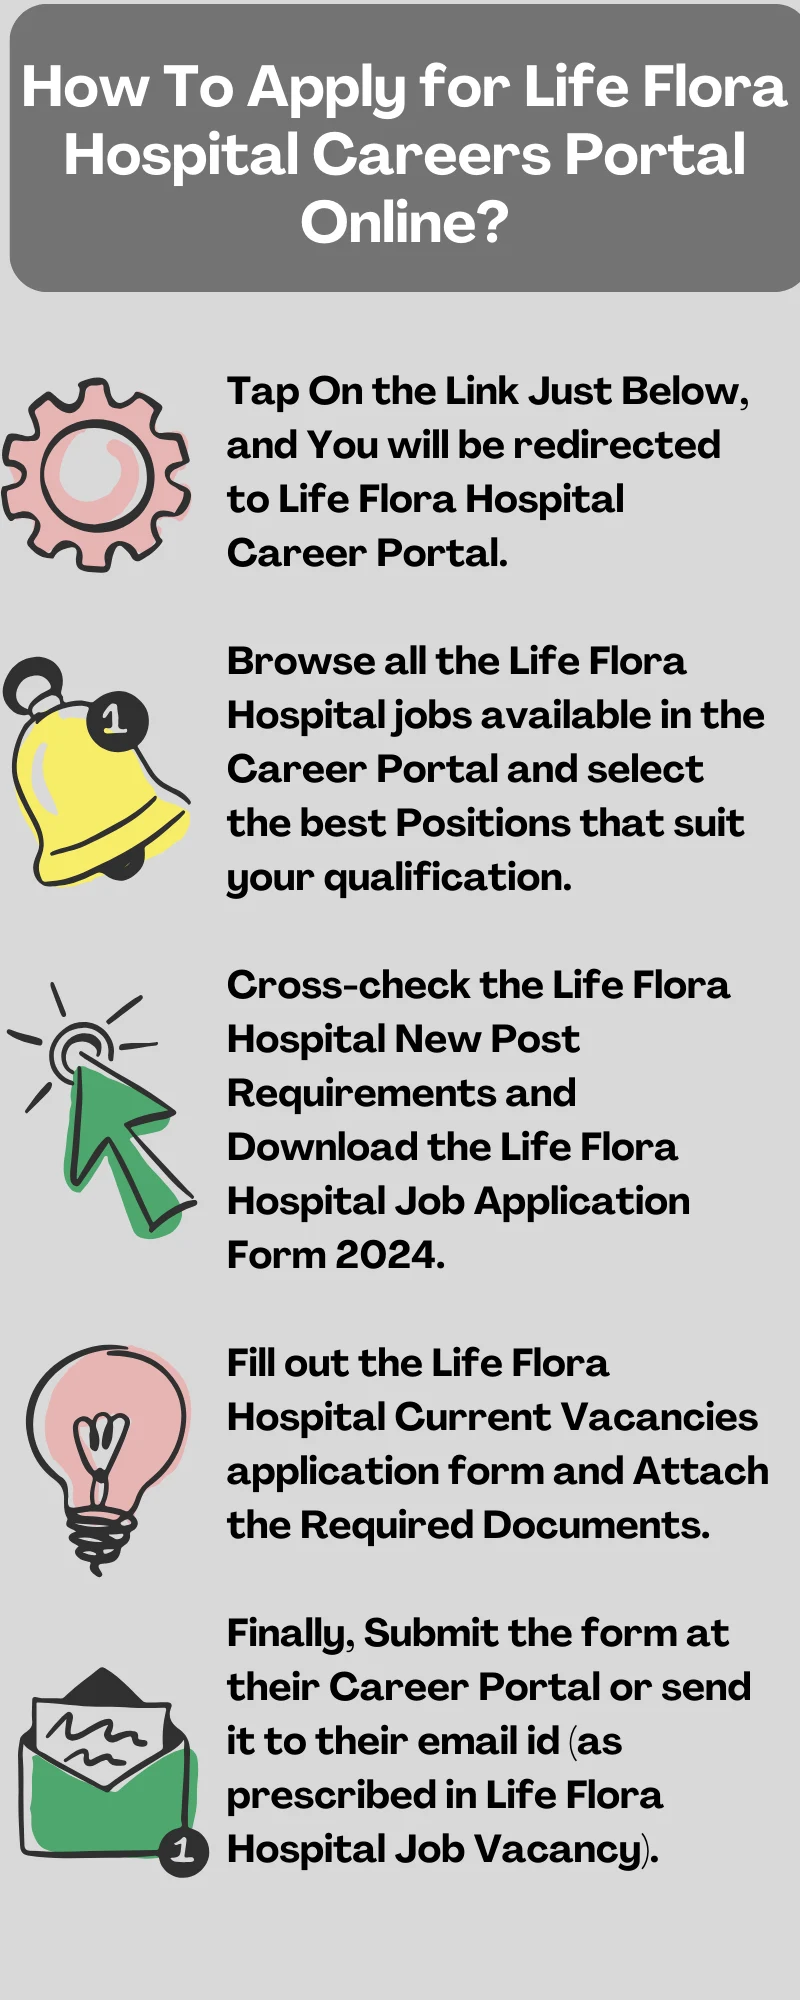 How To Apply for Life Flora Hospital Careers Portal Online?